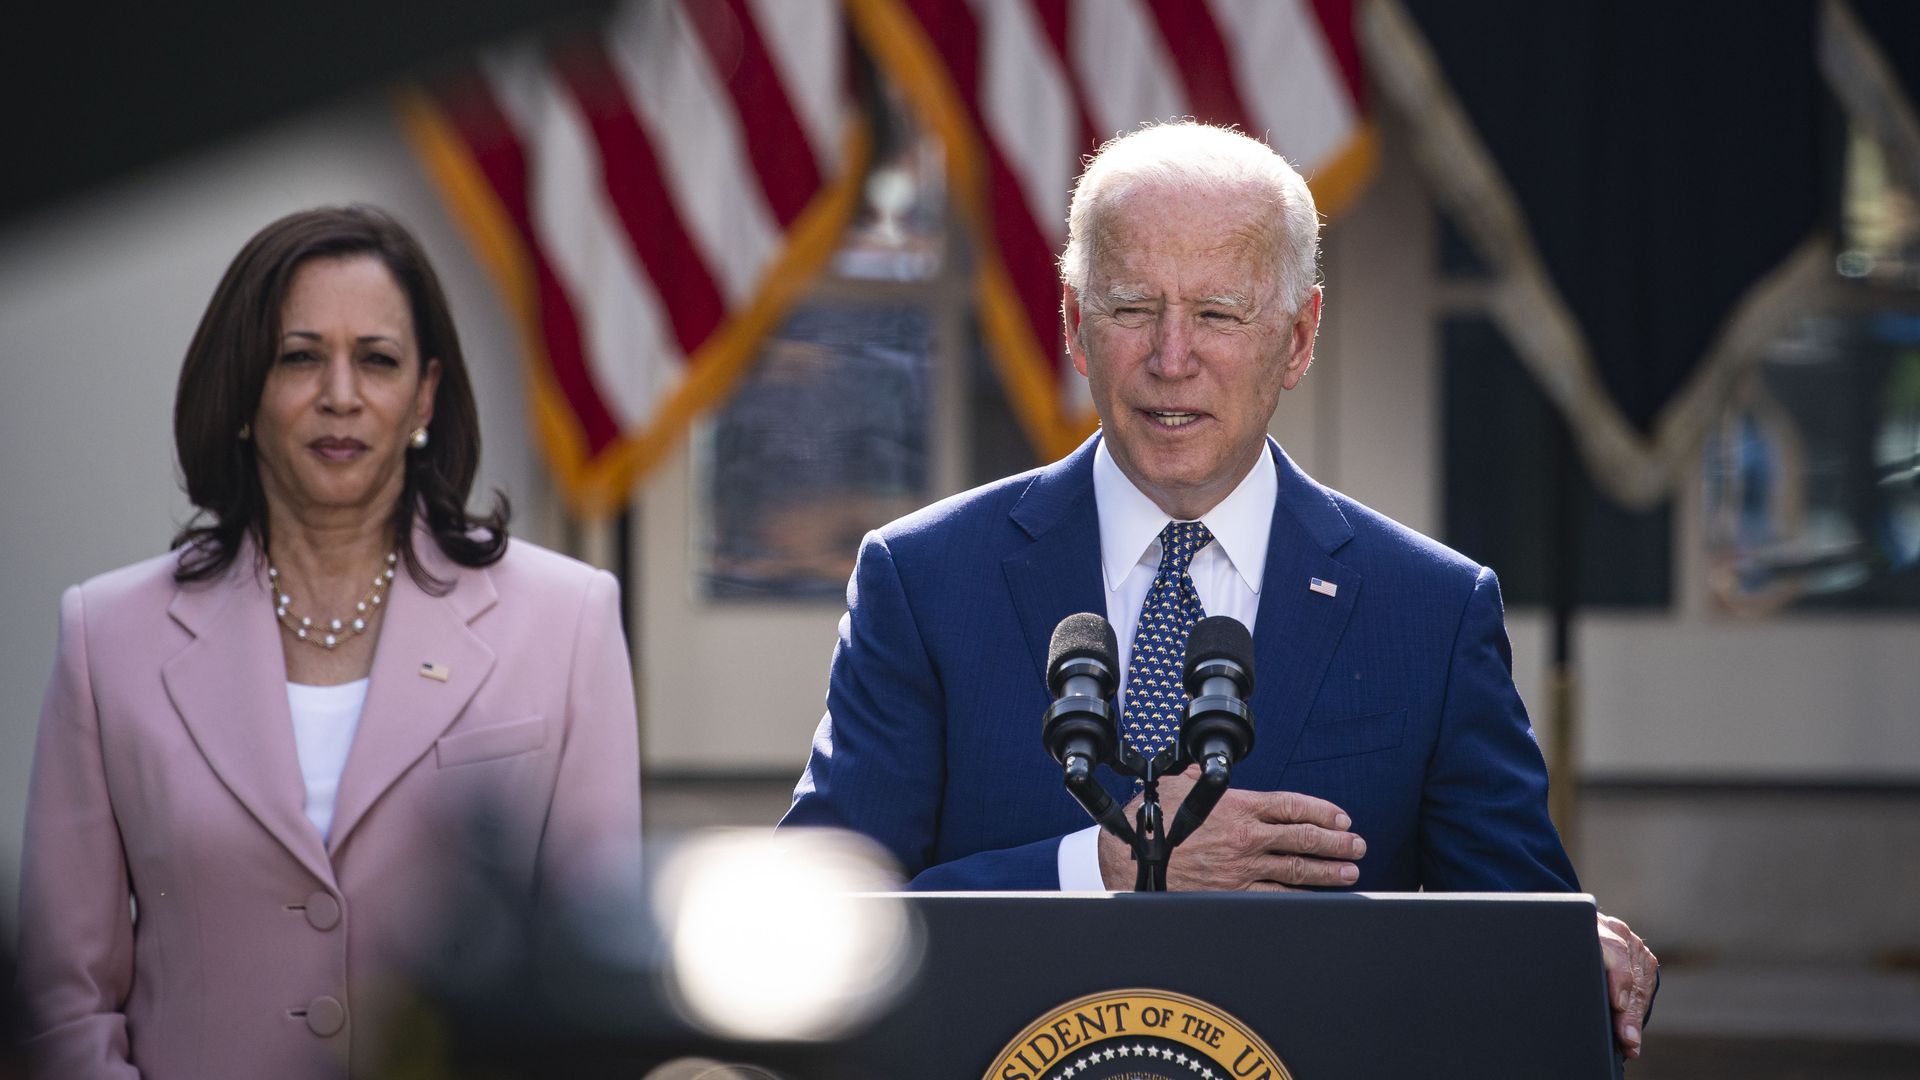 President Biden with Vice President Harris at the White House in August 2021.